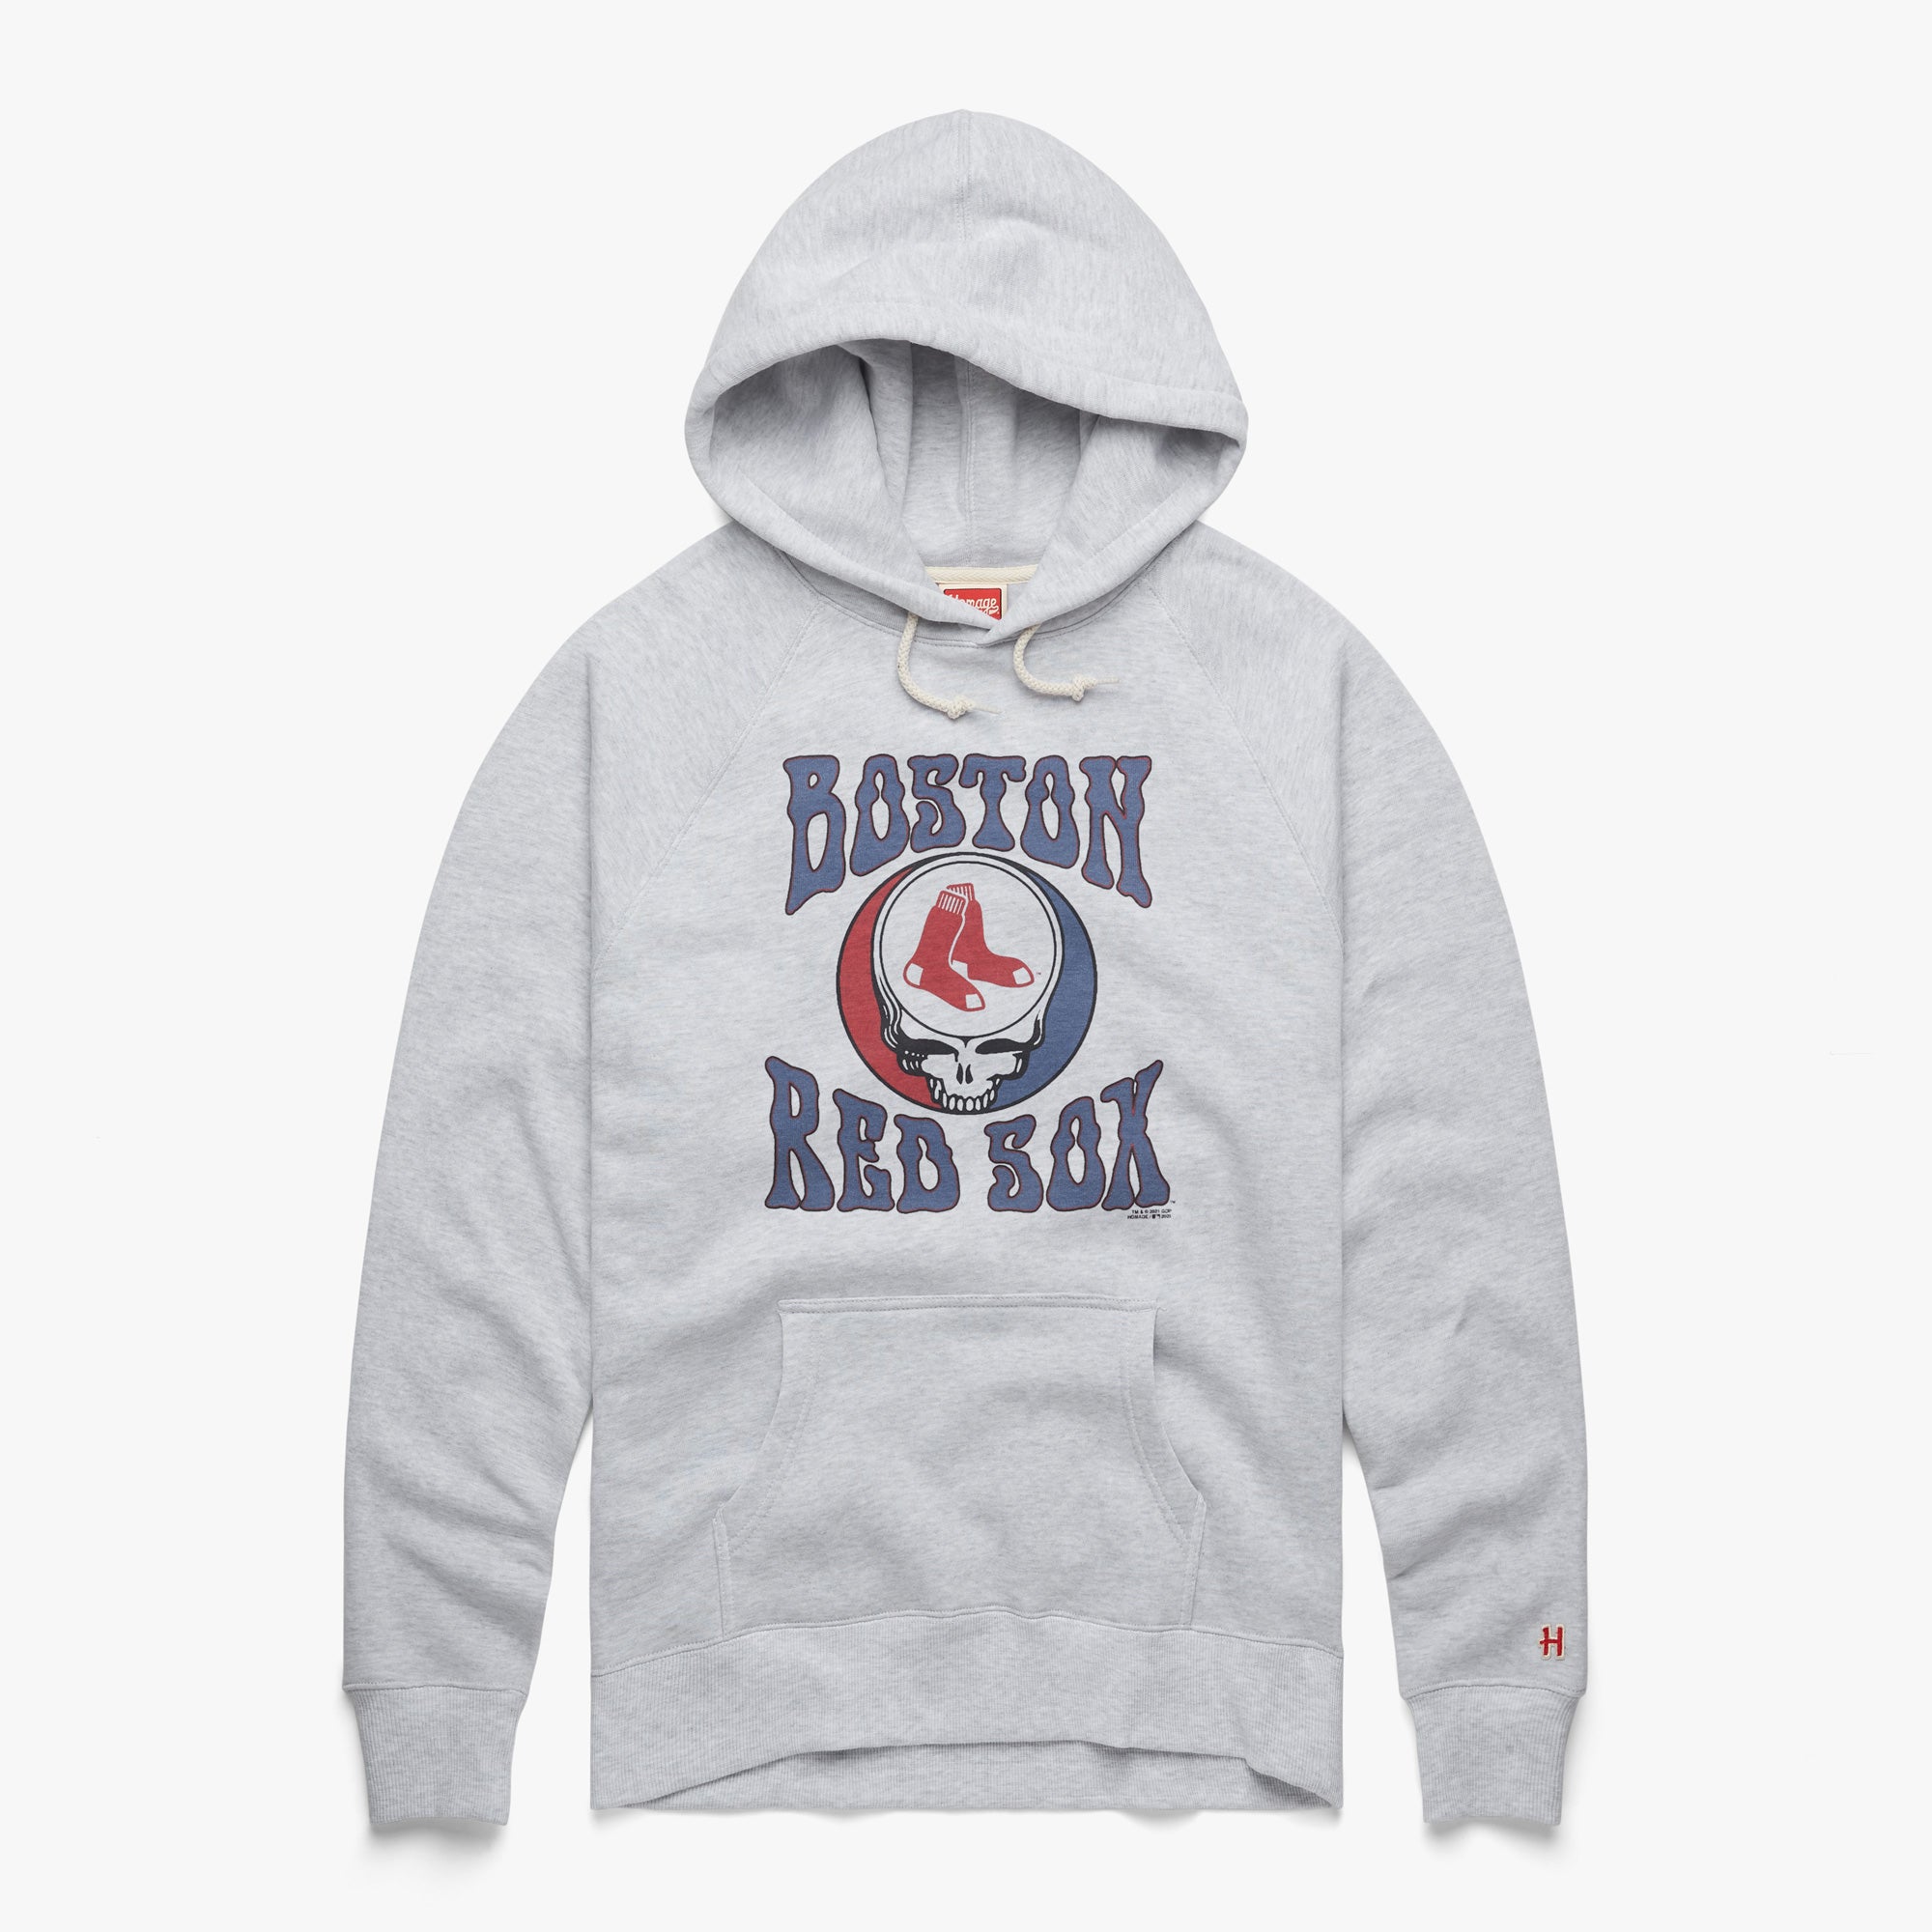 MLB x Grateful Dead x Red Sox Hoodie from Homage. | Ash | Vintage Apparel from Homage.